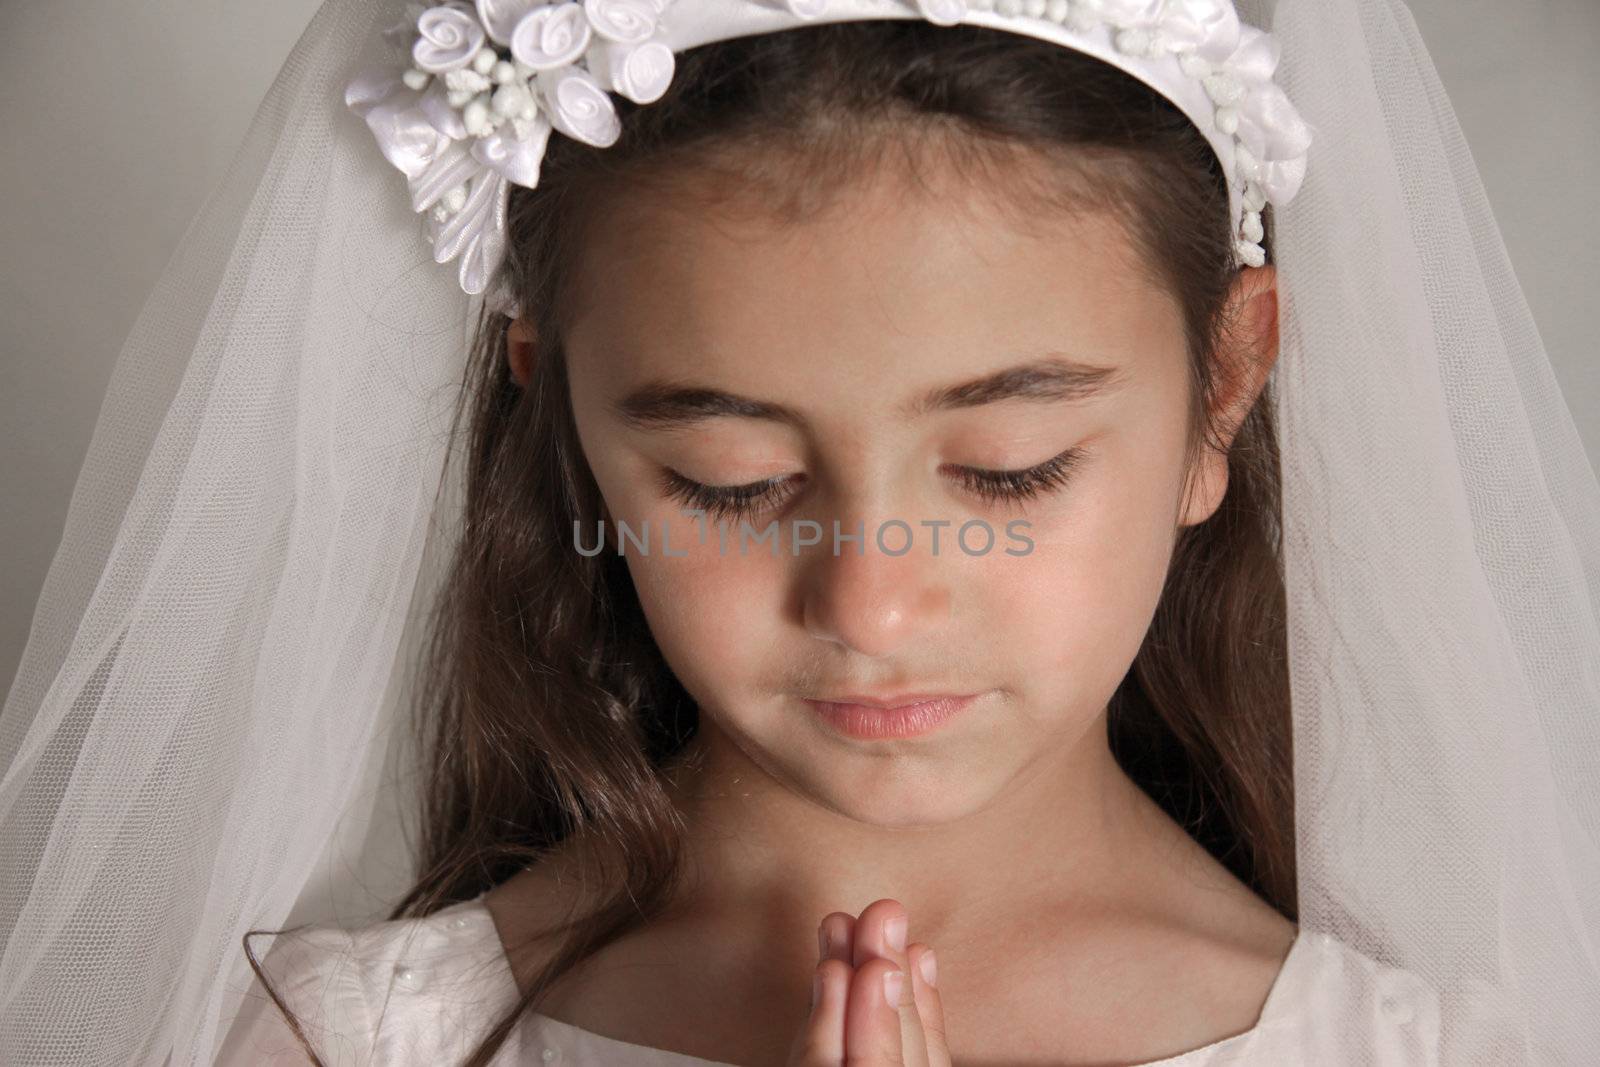 A young girl praying during her first communion celebration